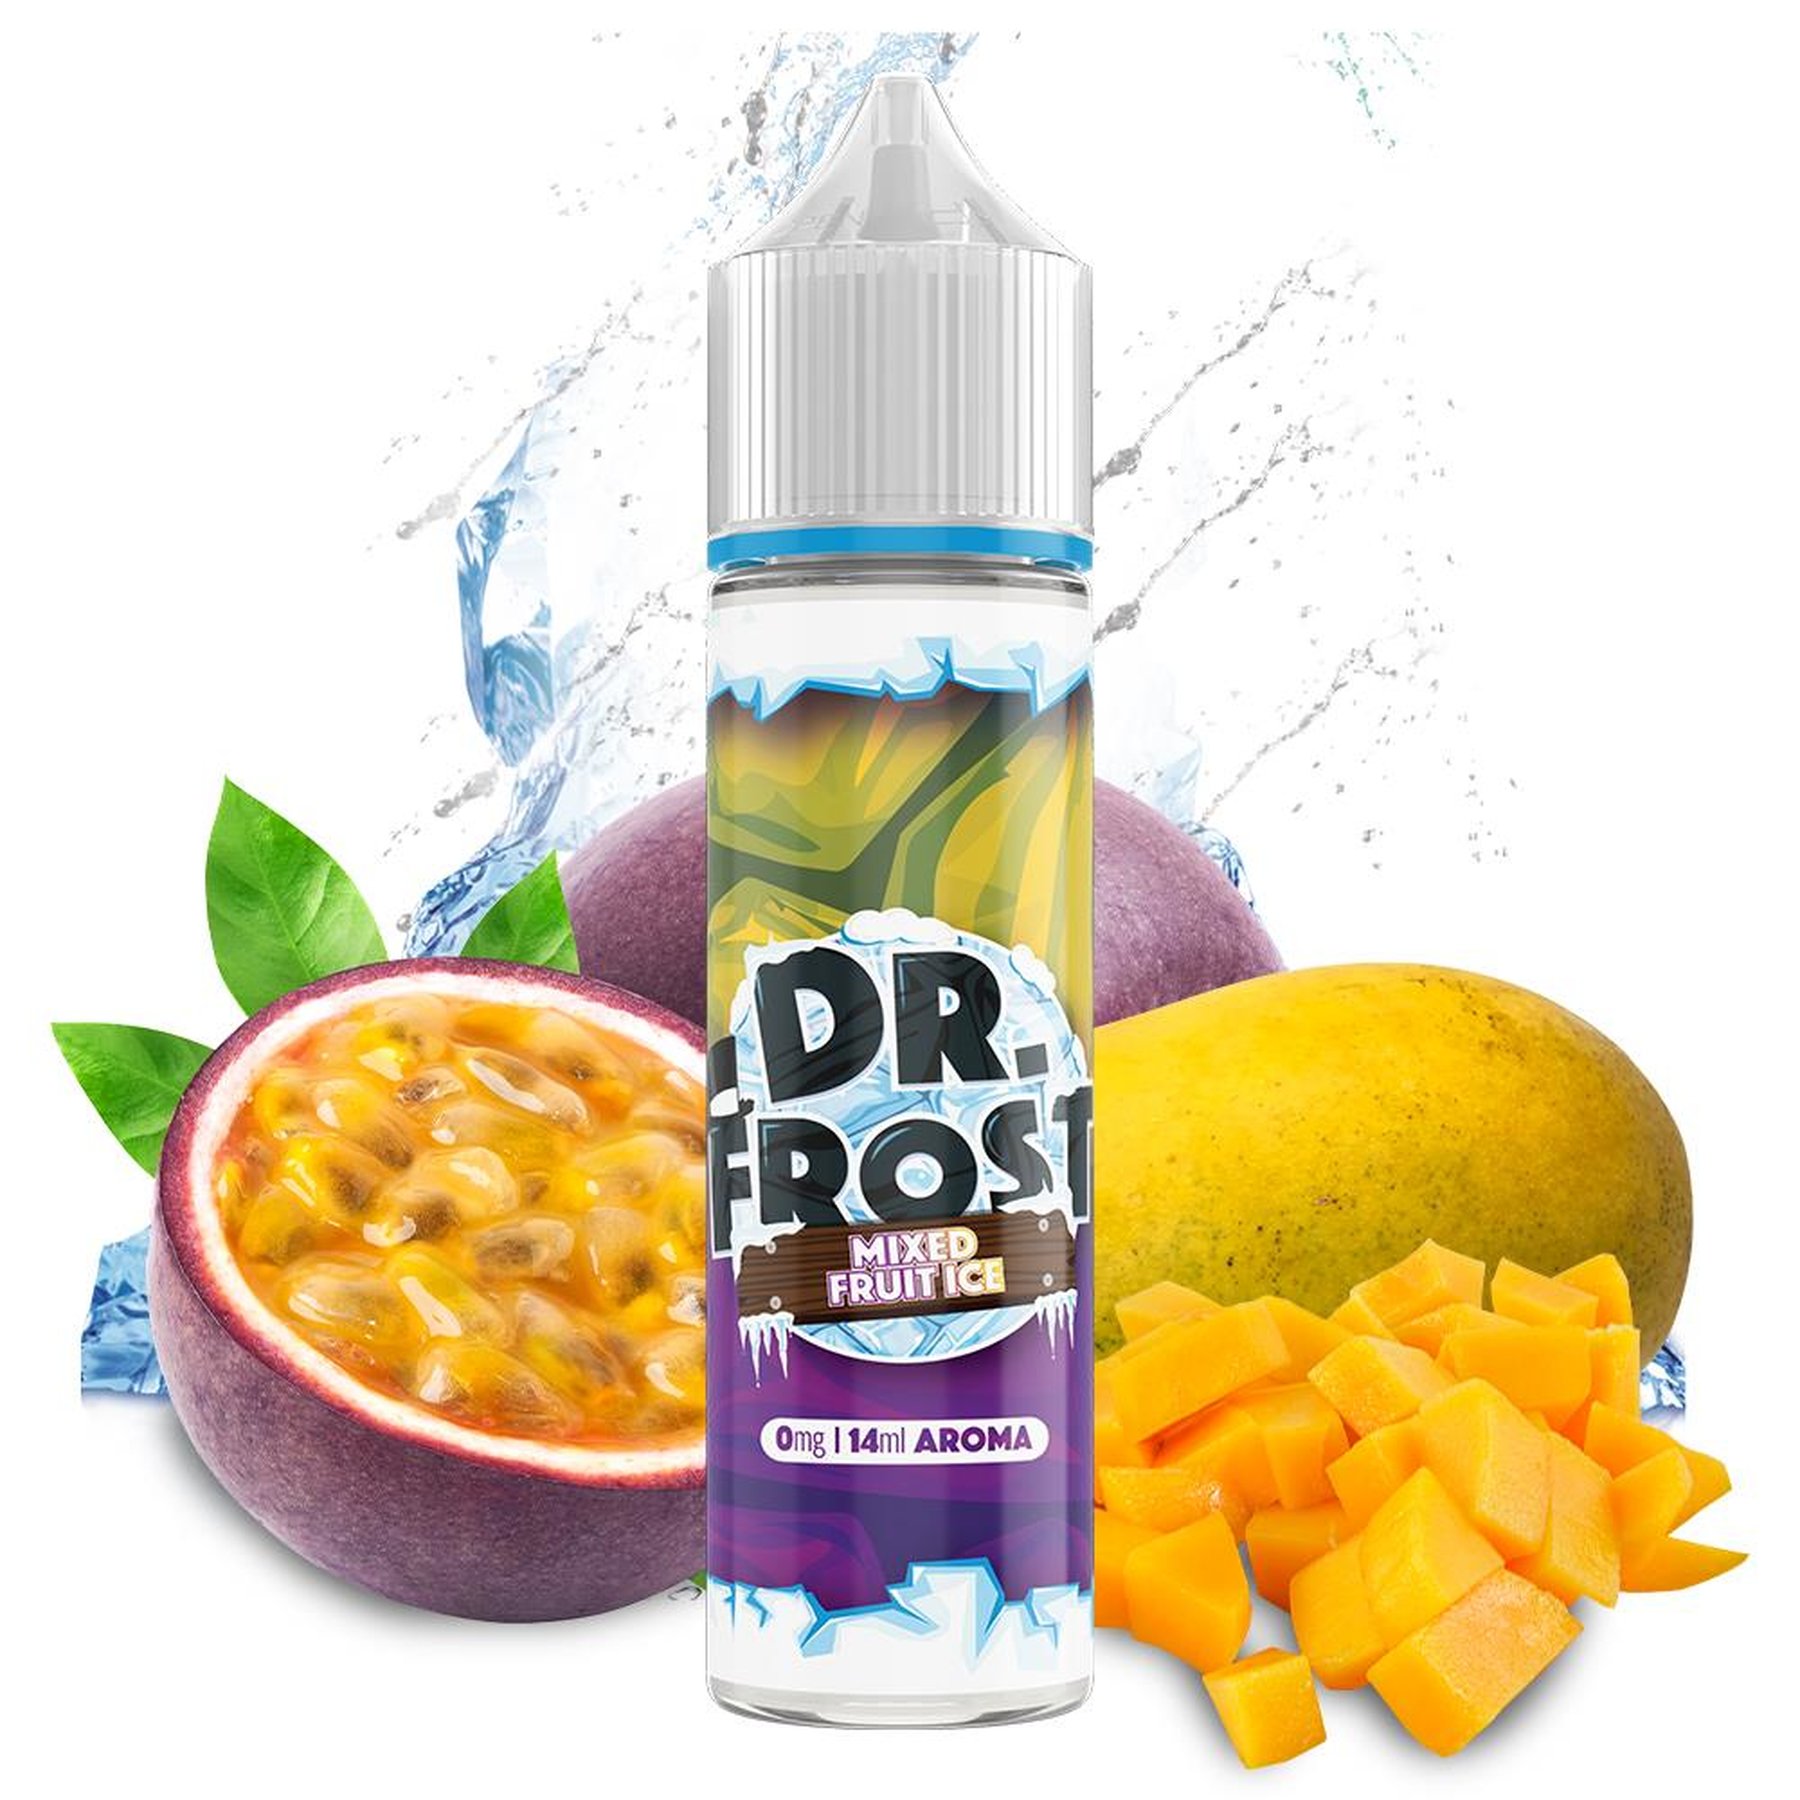 Dr. Frost Mixed Fruit Ice Longfill 14ml